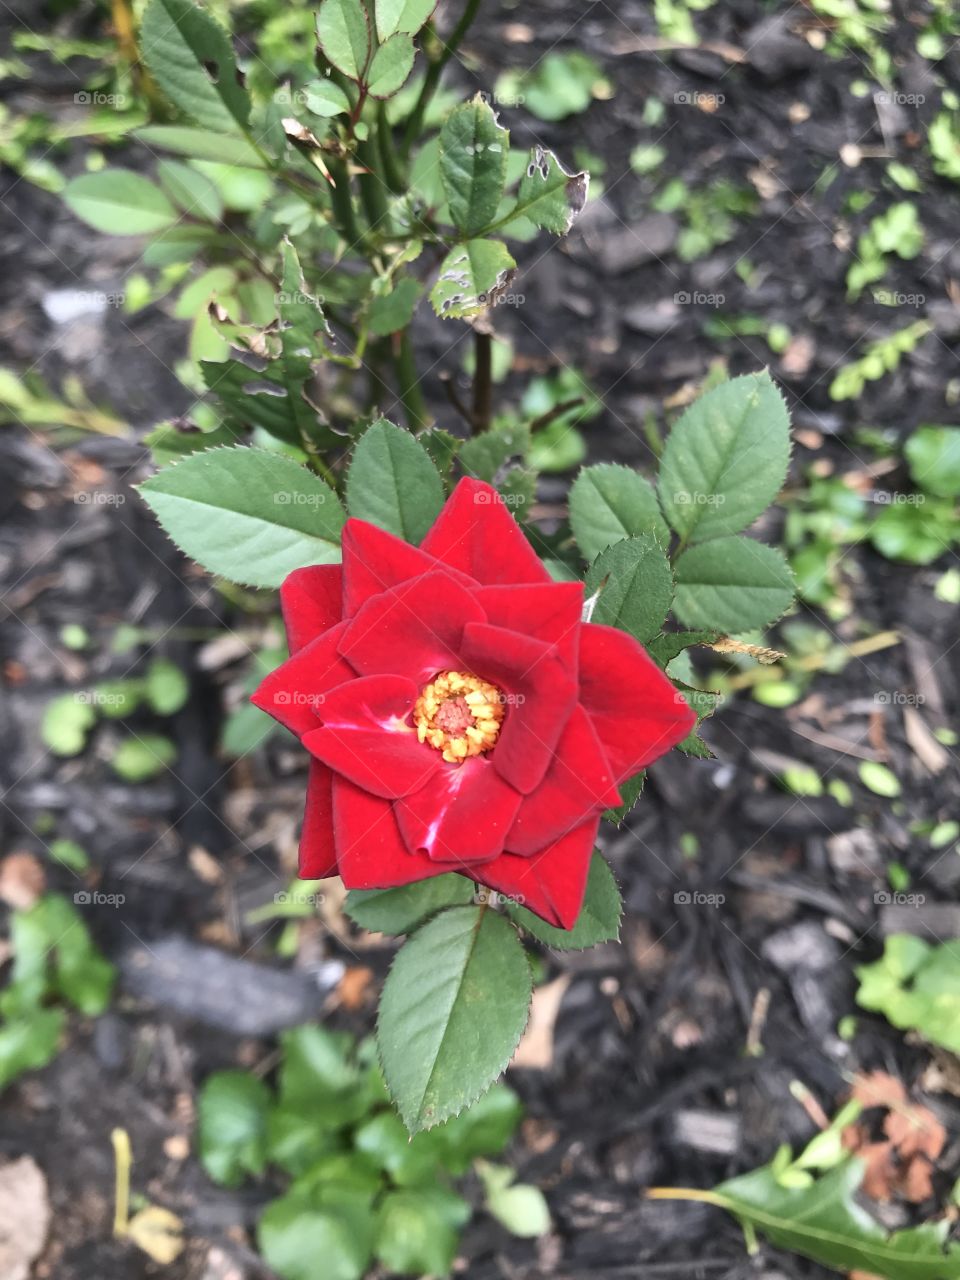 red rose with yellow center, green leaves, brown mulch background with more green leaves